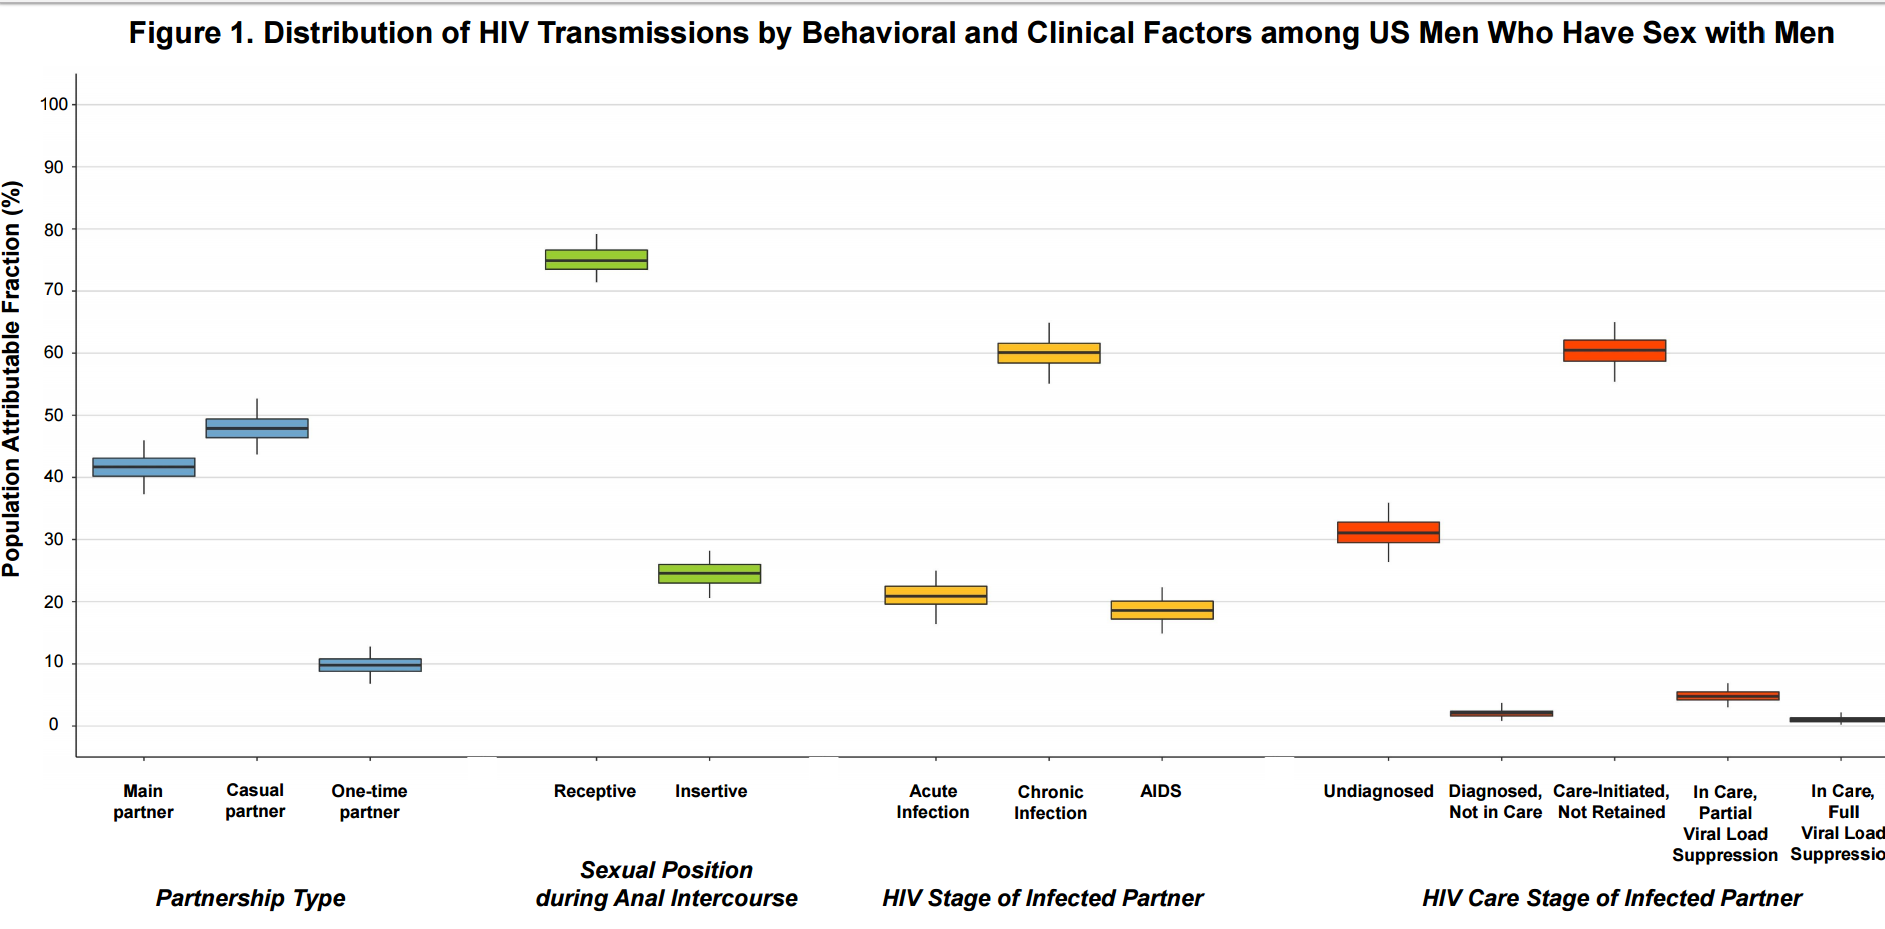 Distribution of HIV Transmission by Network and Clinical Factors Among US MSM